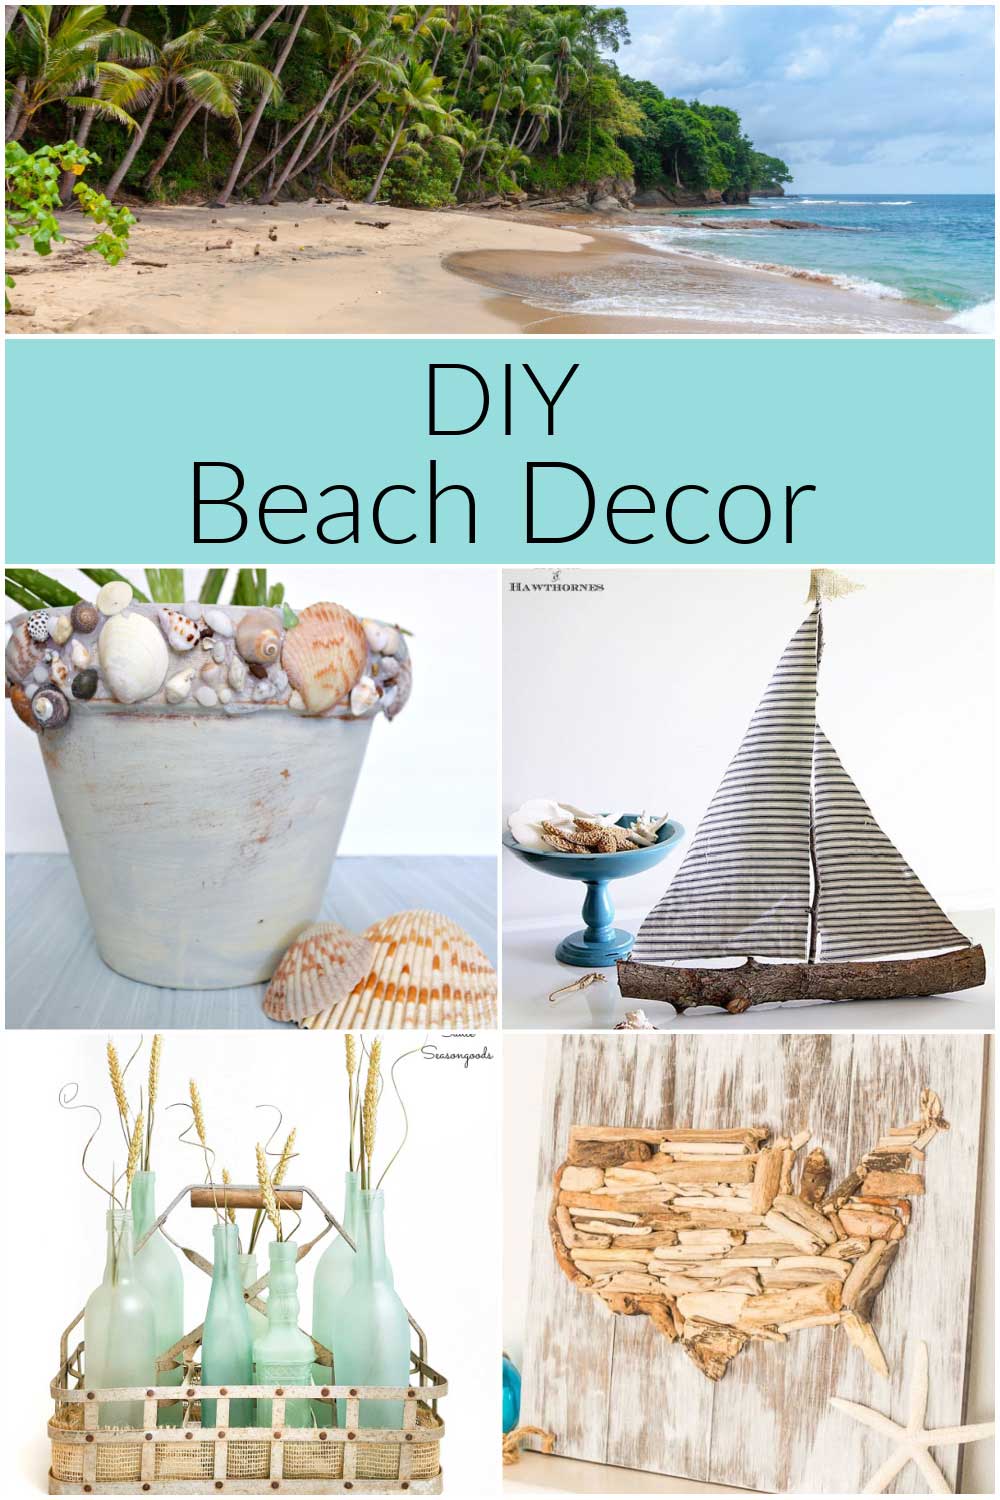 DIY beach decor image with sailboat, shell covered flower pot, driftwood map and more.